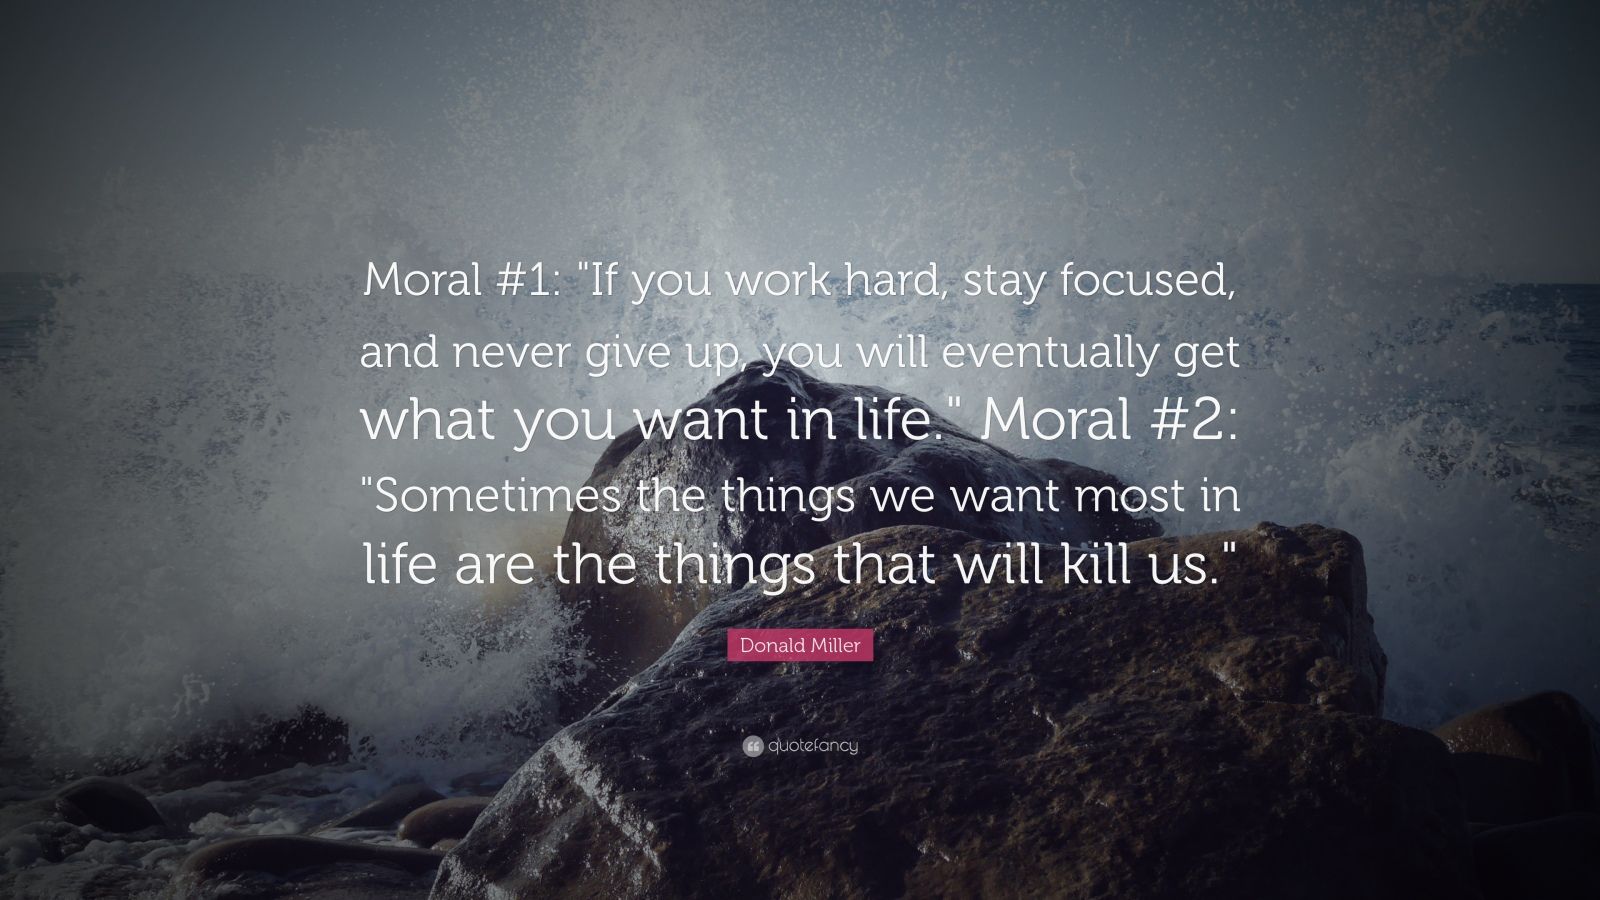 13170 Donald Miller Quote Moral 1 If you work hard stay focused and